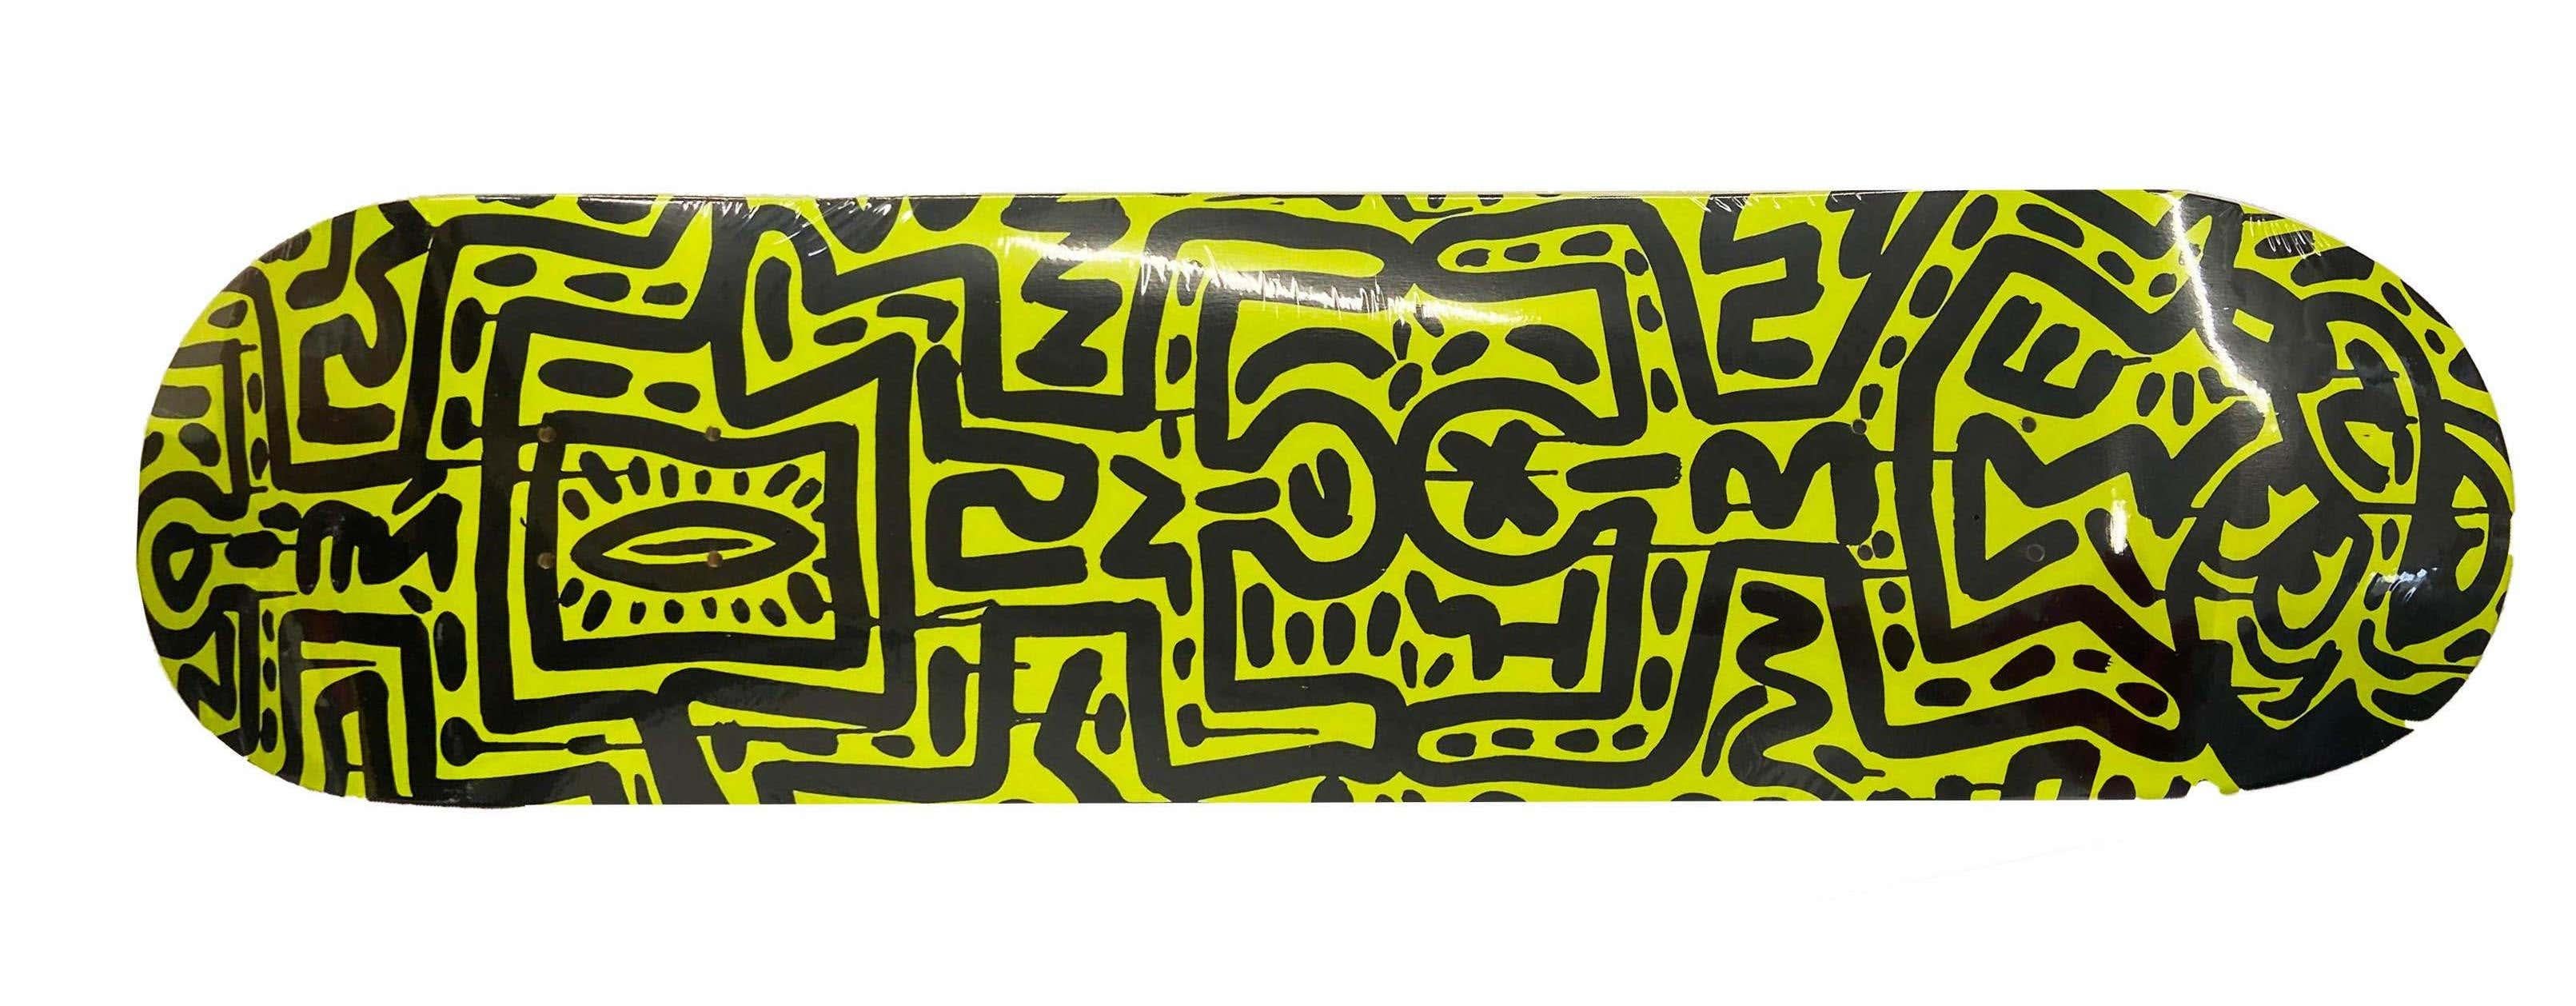 Keith Haring Skateboard Deck (Keith Haring Mickey Mouse) For Sale 1